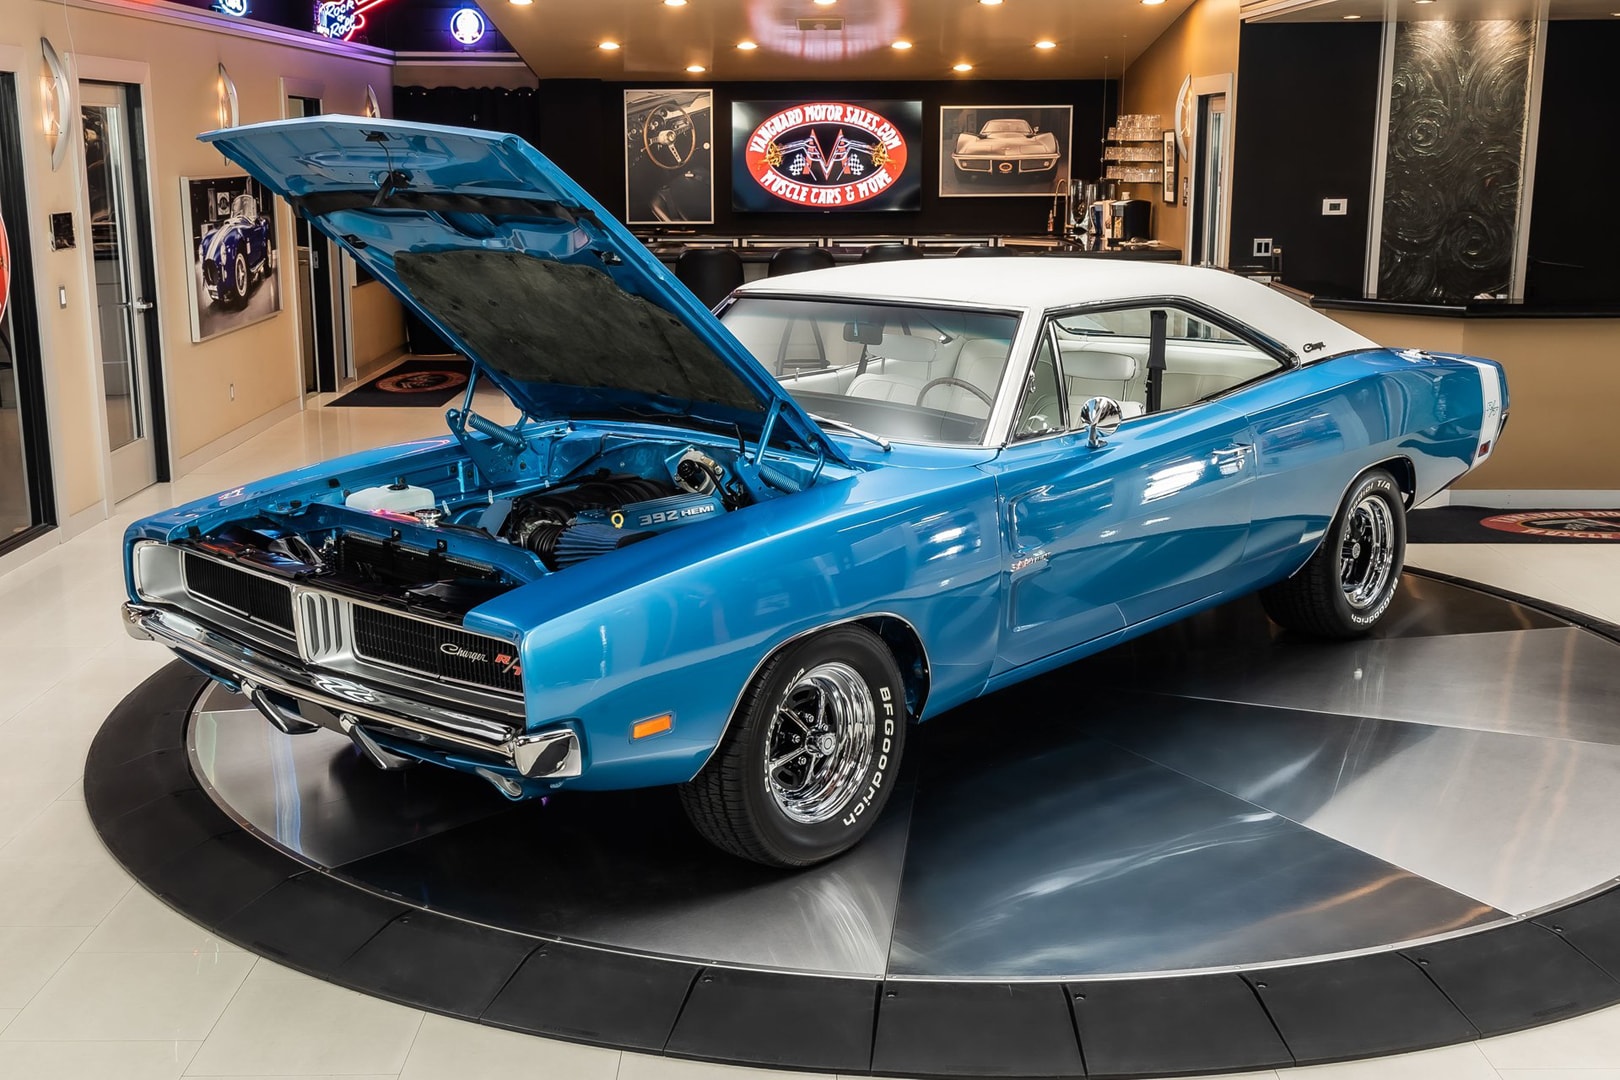 Exquisite '69 Charger RT Restomod